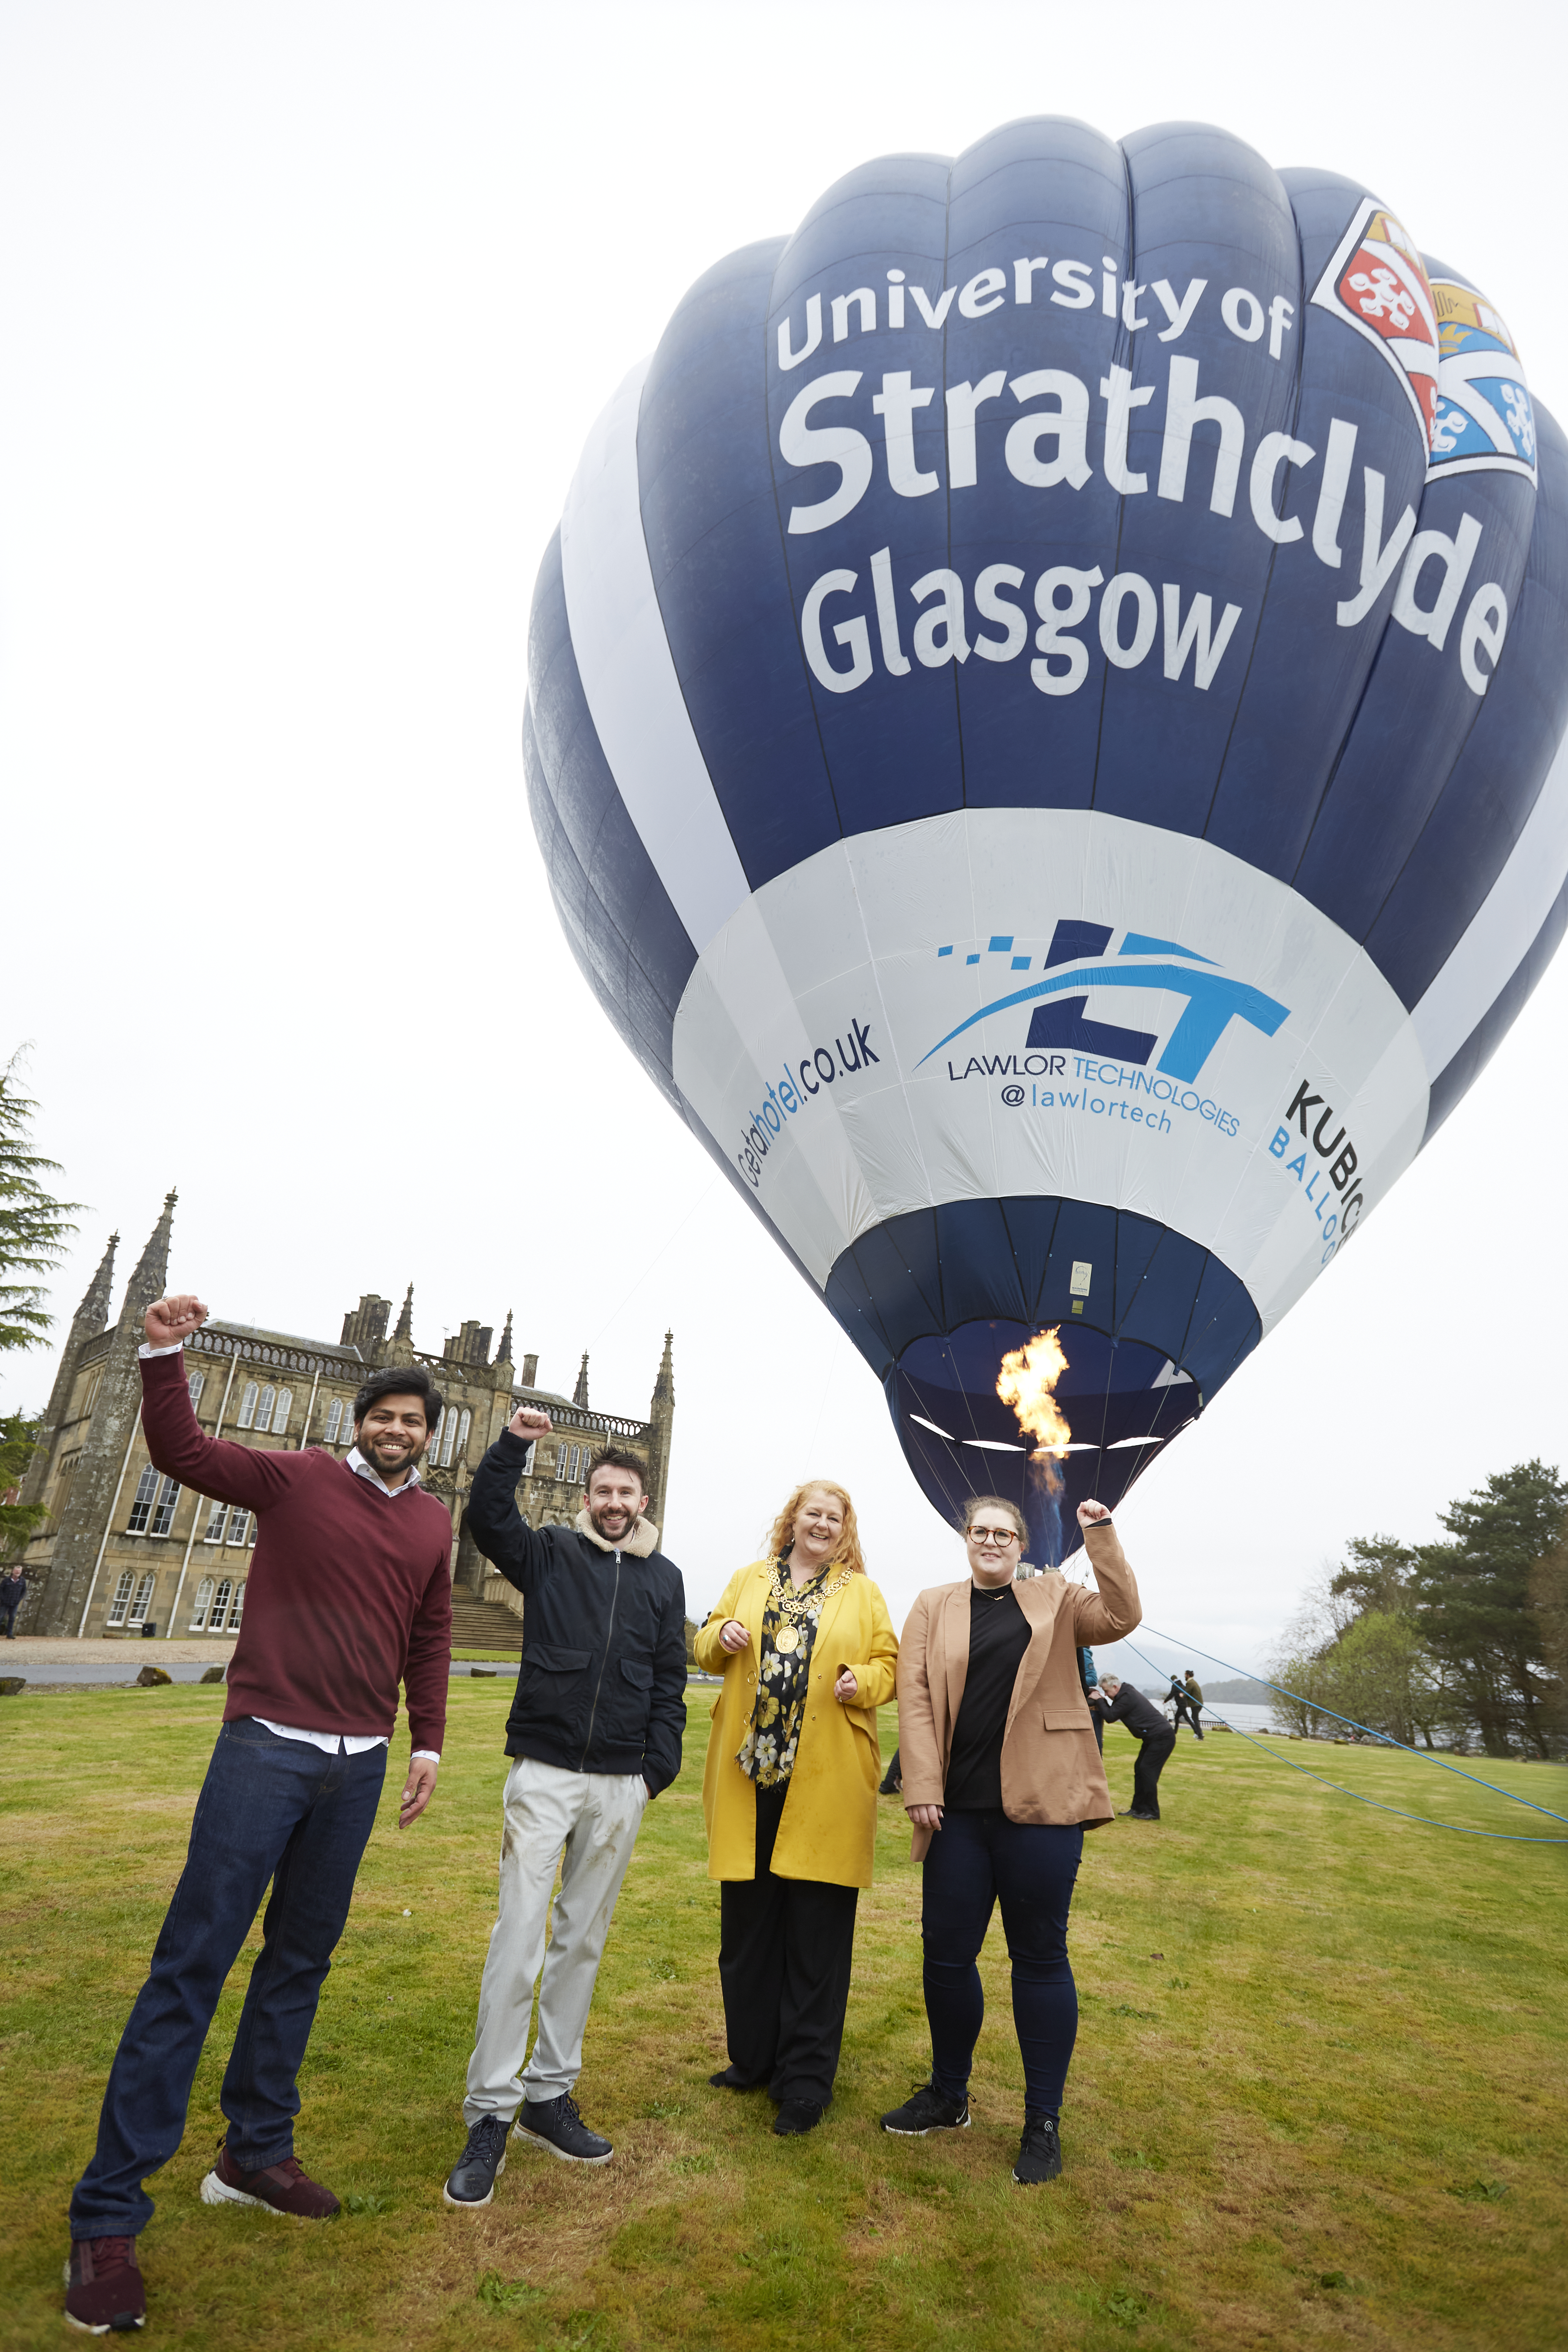 The maiden launch of 'Big Andy', Strathclyde's branded hot air balloon. L-R: Sheik Abdul Malik; Chris Lawlor of Lawlor Technologies; Glasgow City Lord Provost Jacqueline McLaren; Maisie Keogh. Photo by Guy Hinks